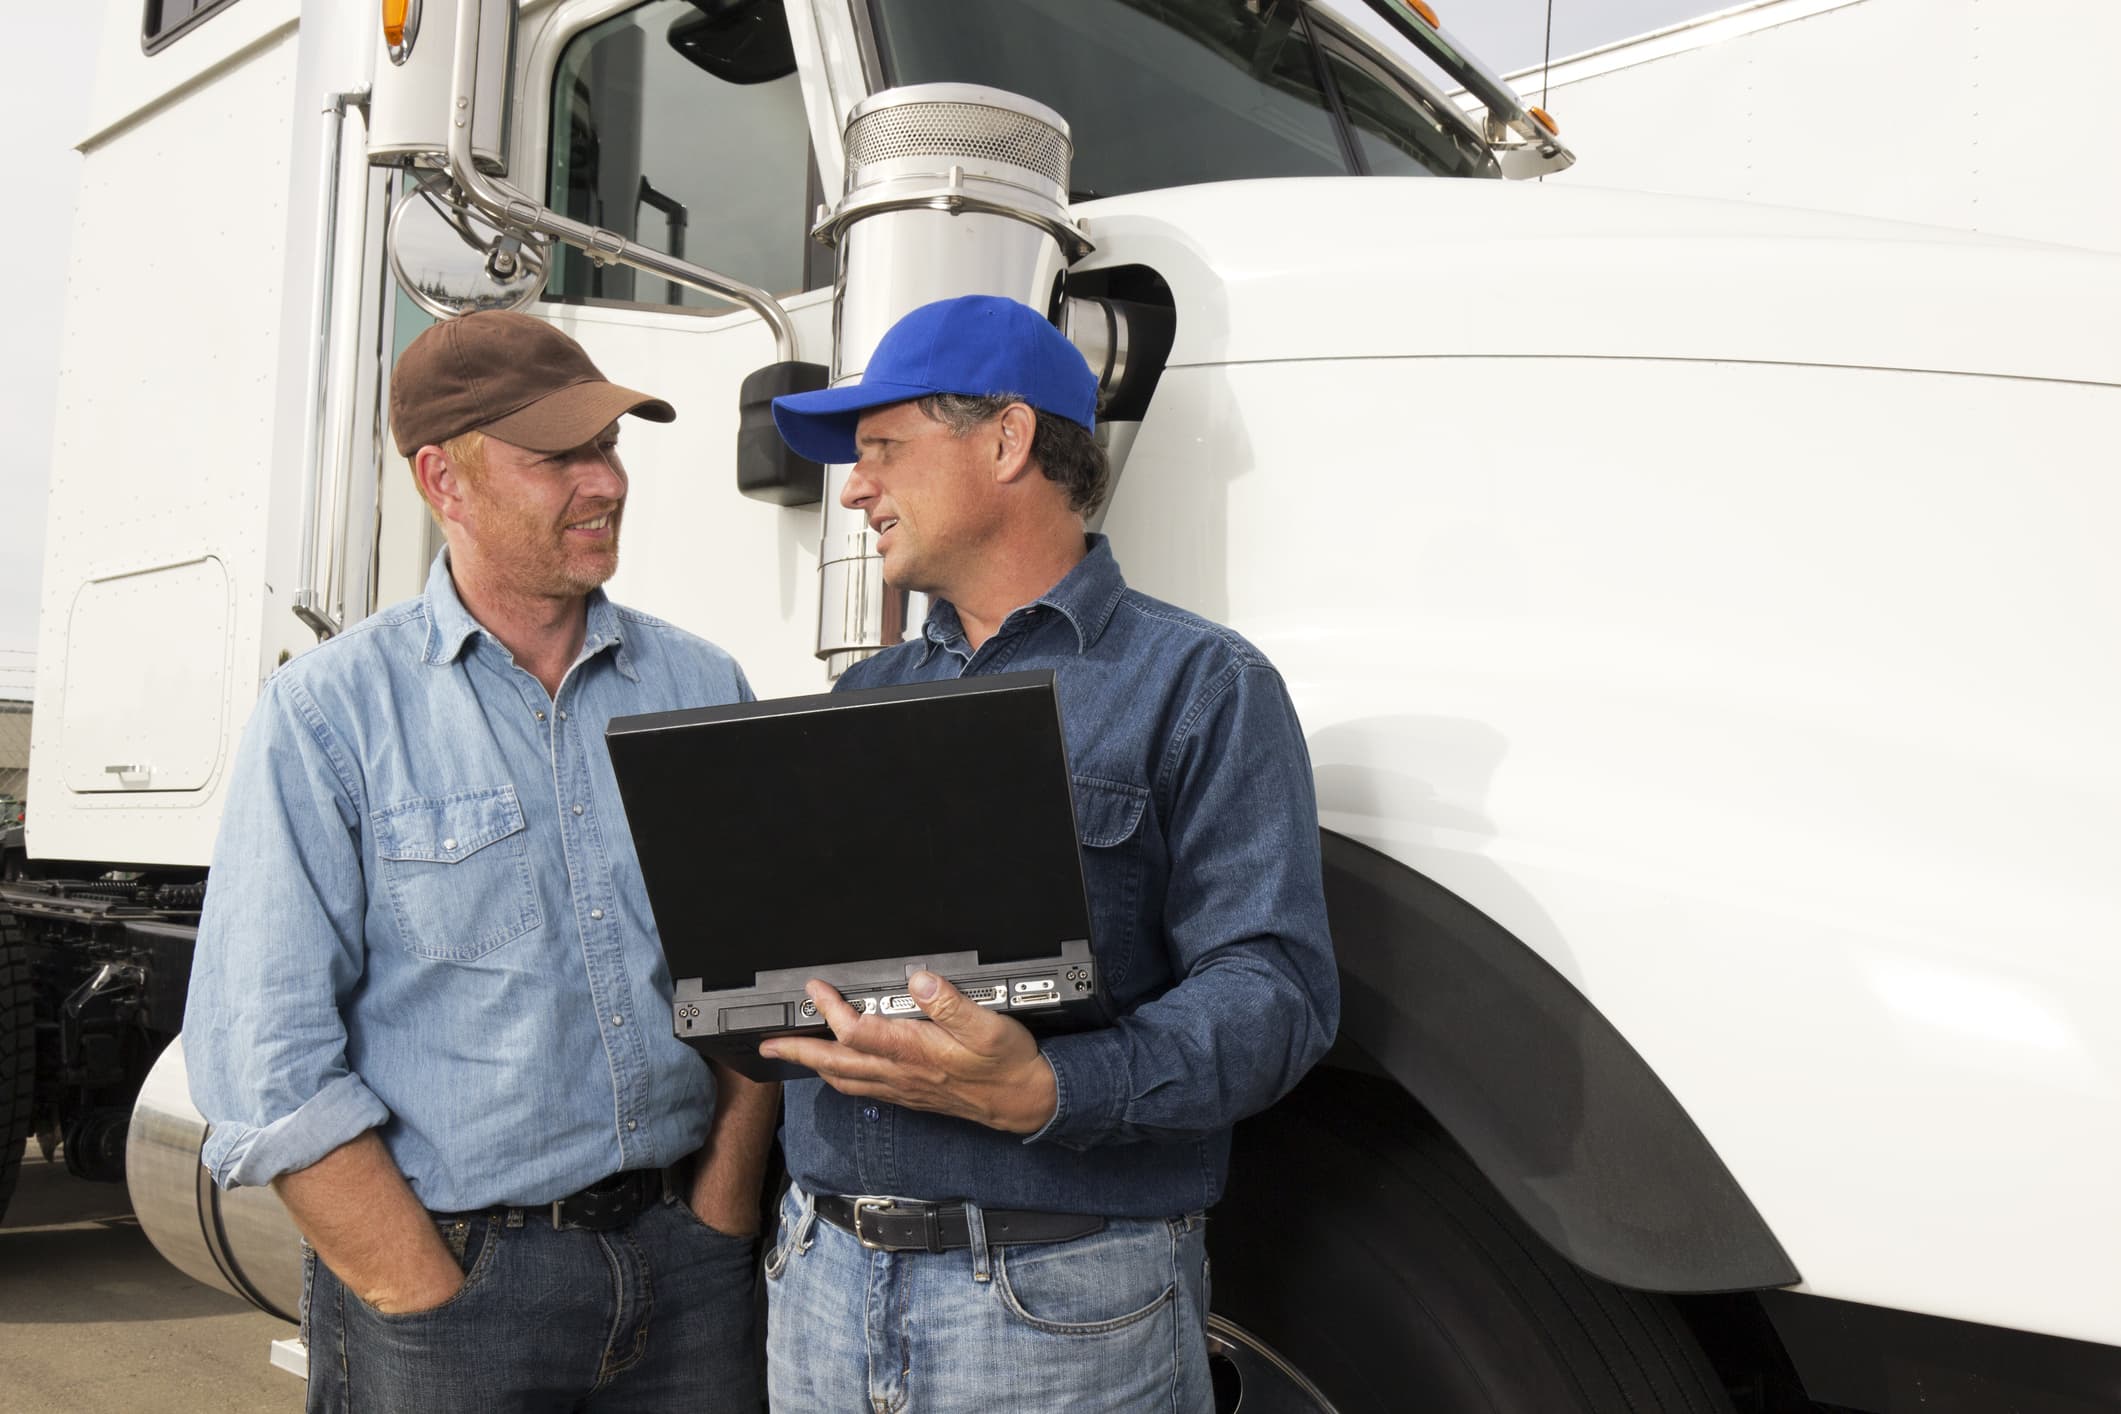 two truck drivers standing next to a truck talking and holding a computer 